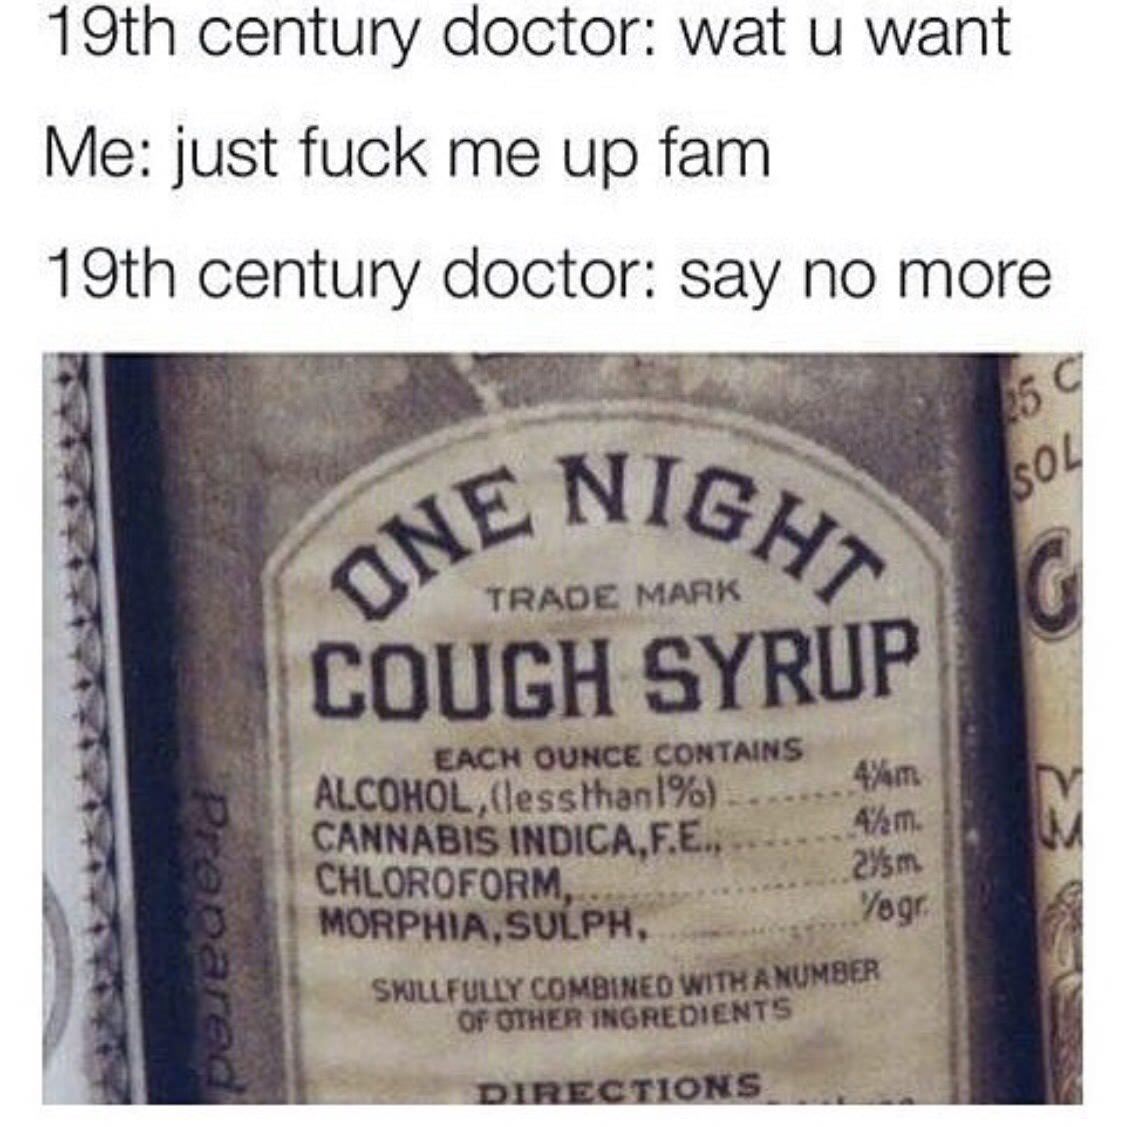 One night cough syrup - meme